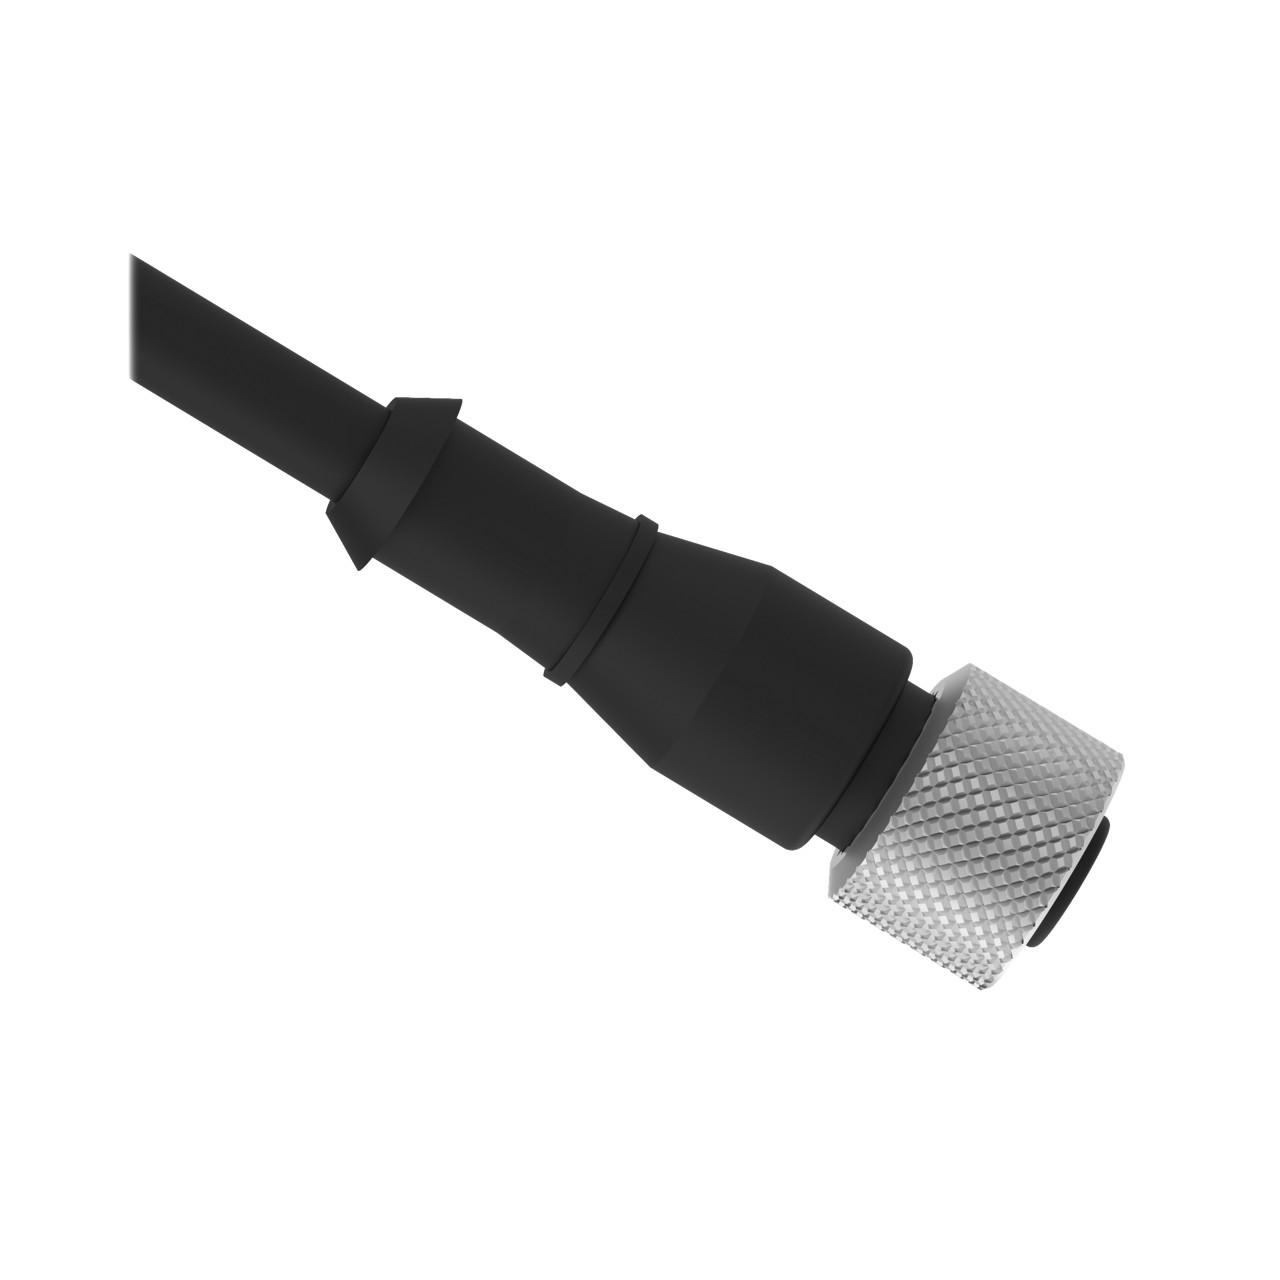 Banner MQDC1-515 Euro-style Quick Disconnect Cable, 5 Pin Straight Connector, 5 m (15 ft) in Length, Chrome plated brass coupling nut